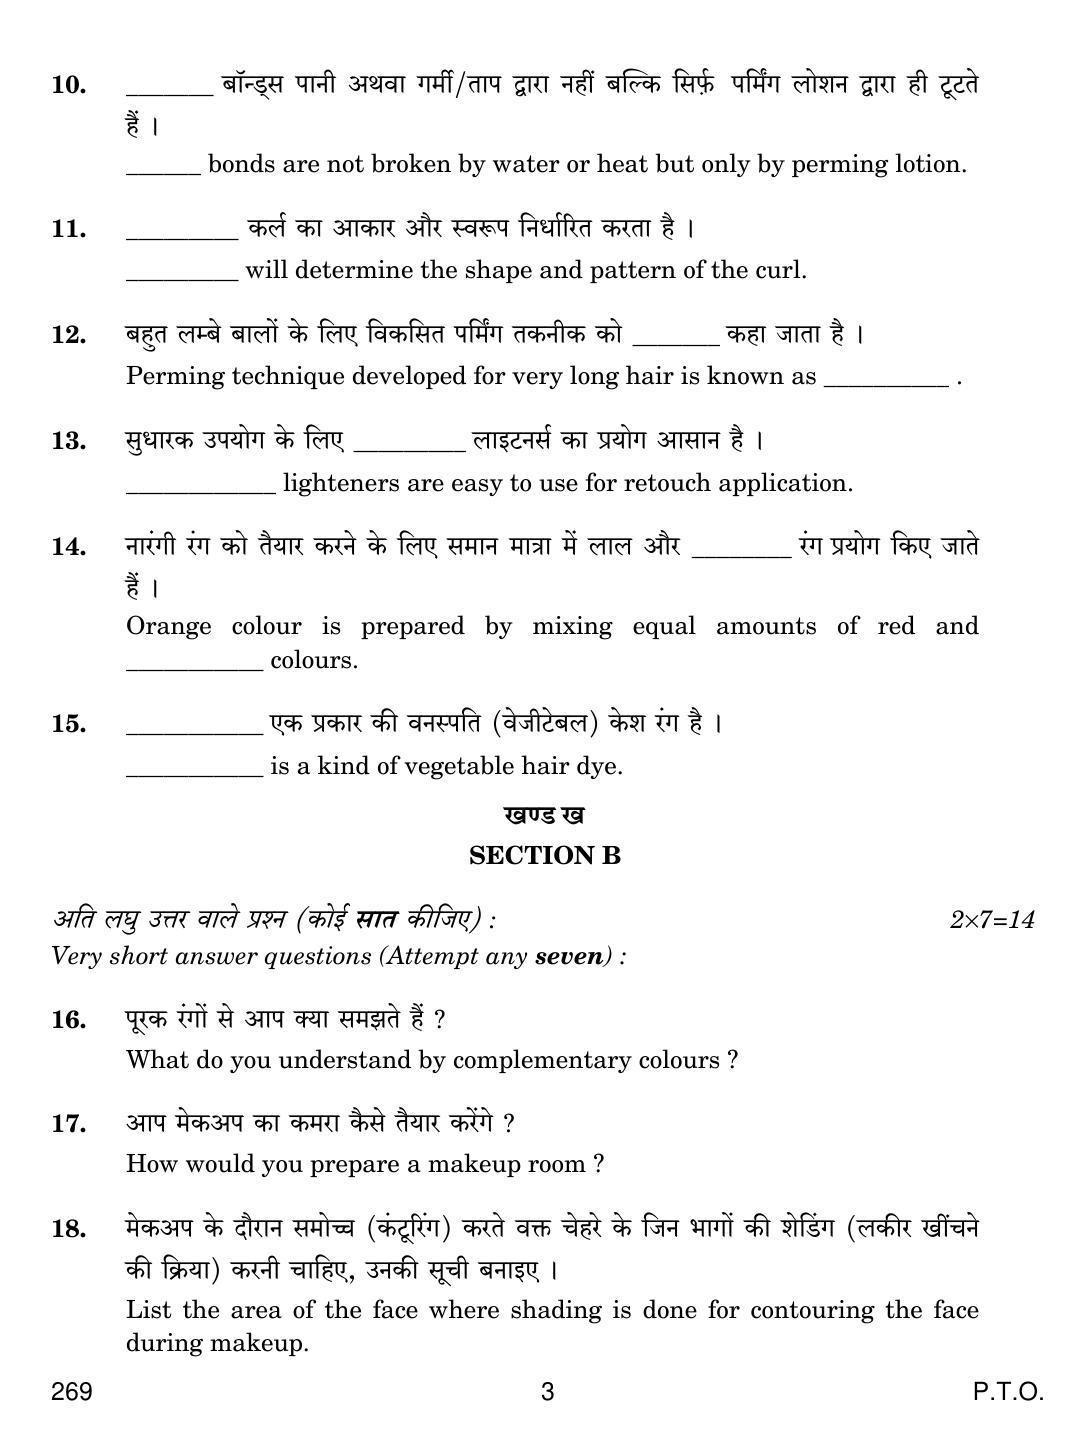 CBSE Class 12 269 BEAUTY AND HAIR 2018 Question Paper - Page 3